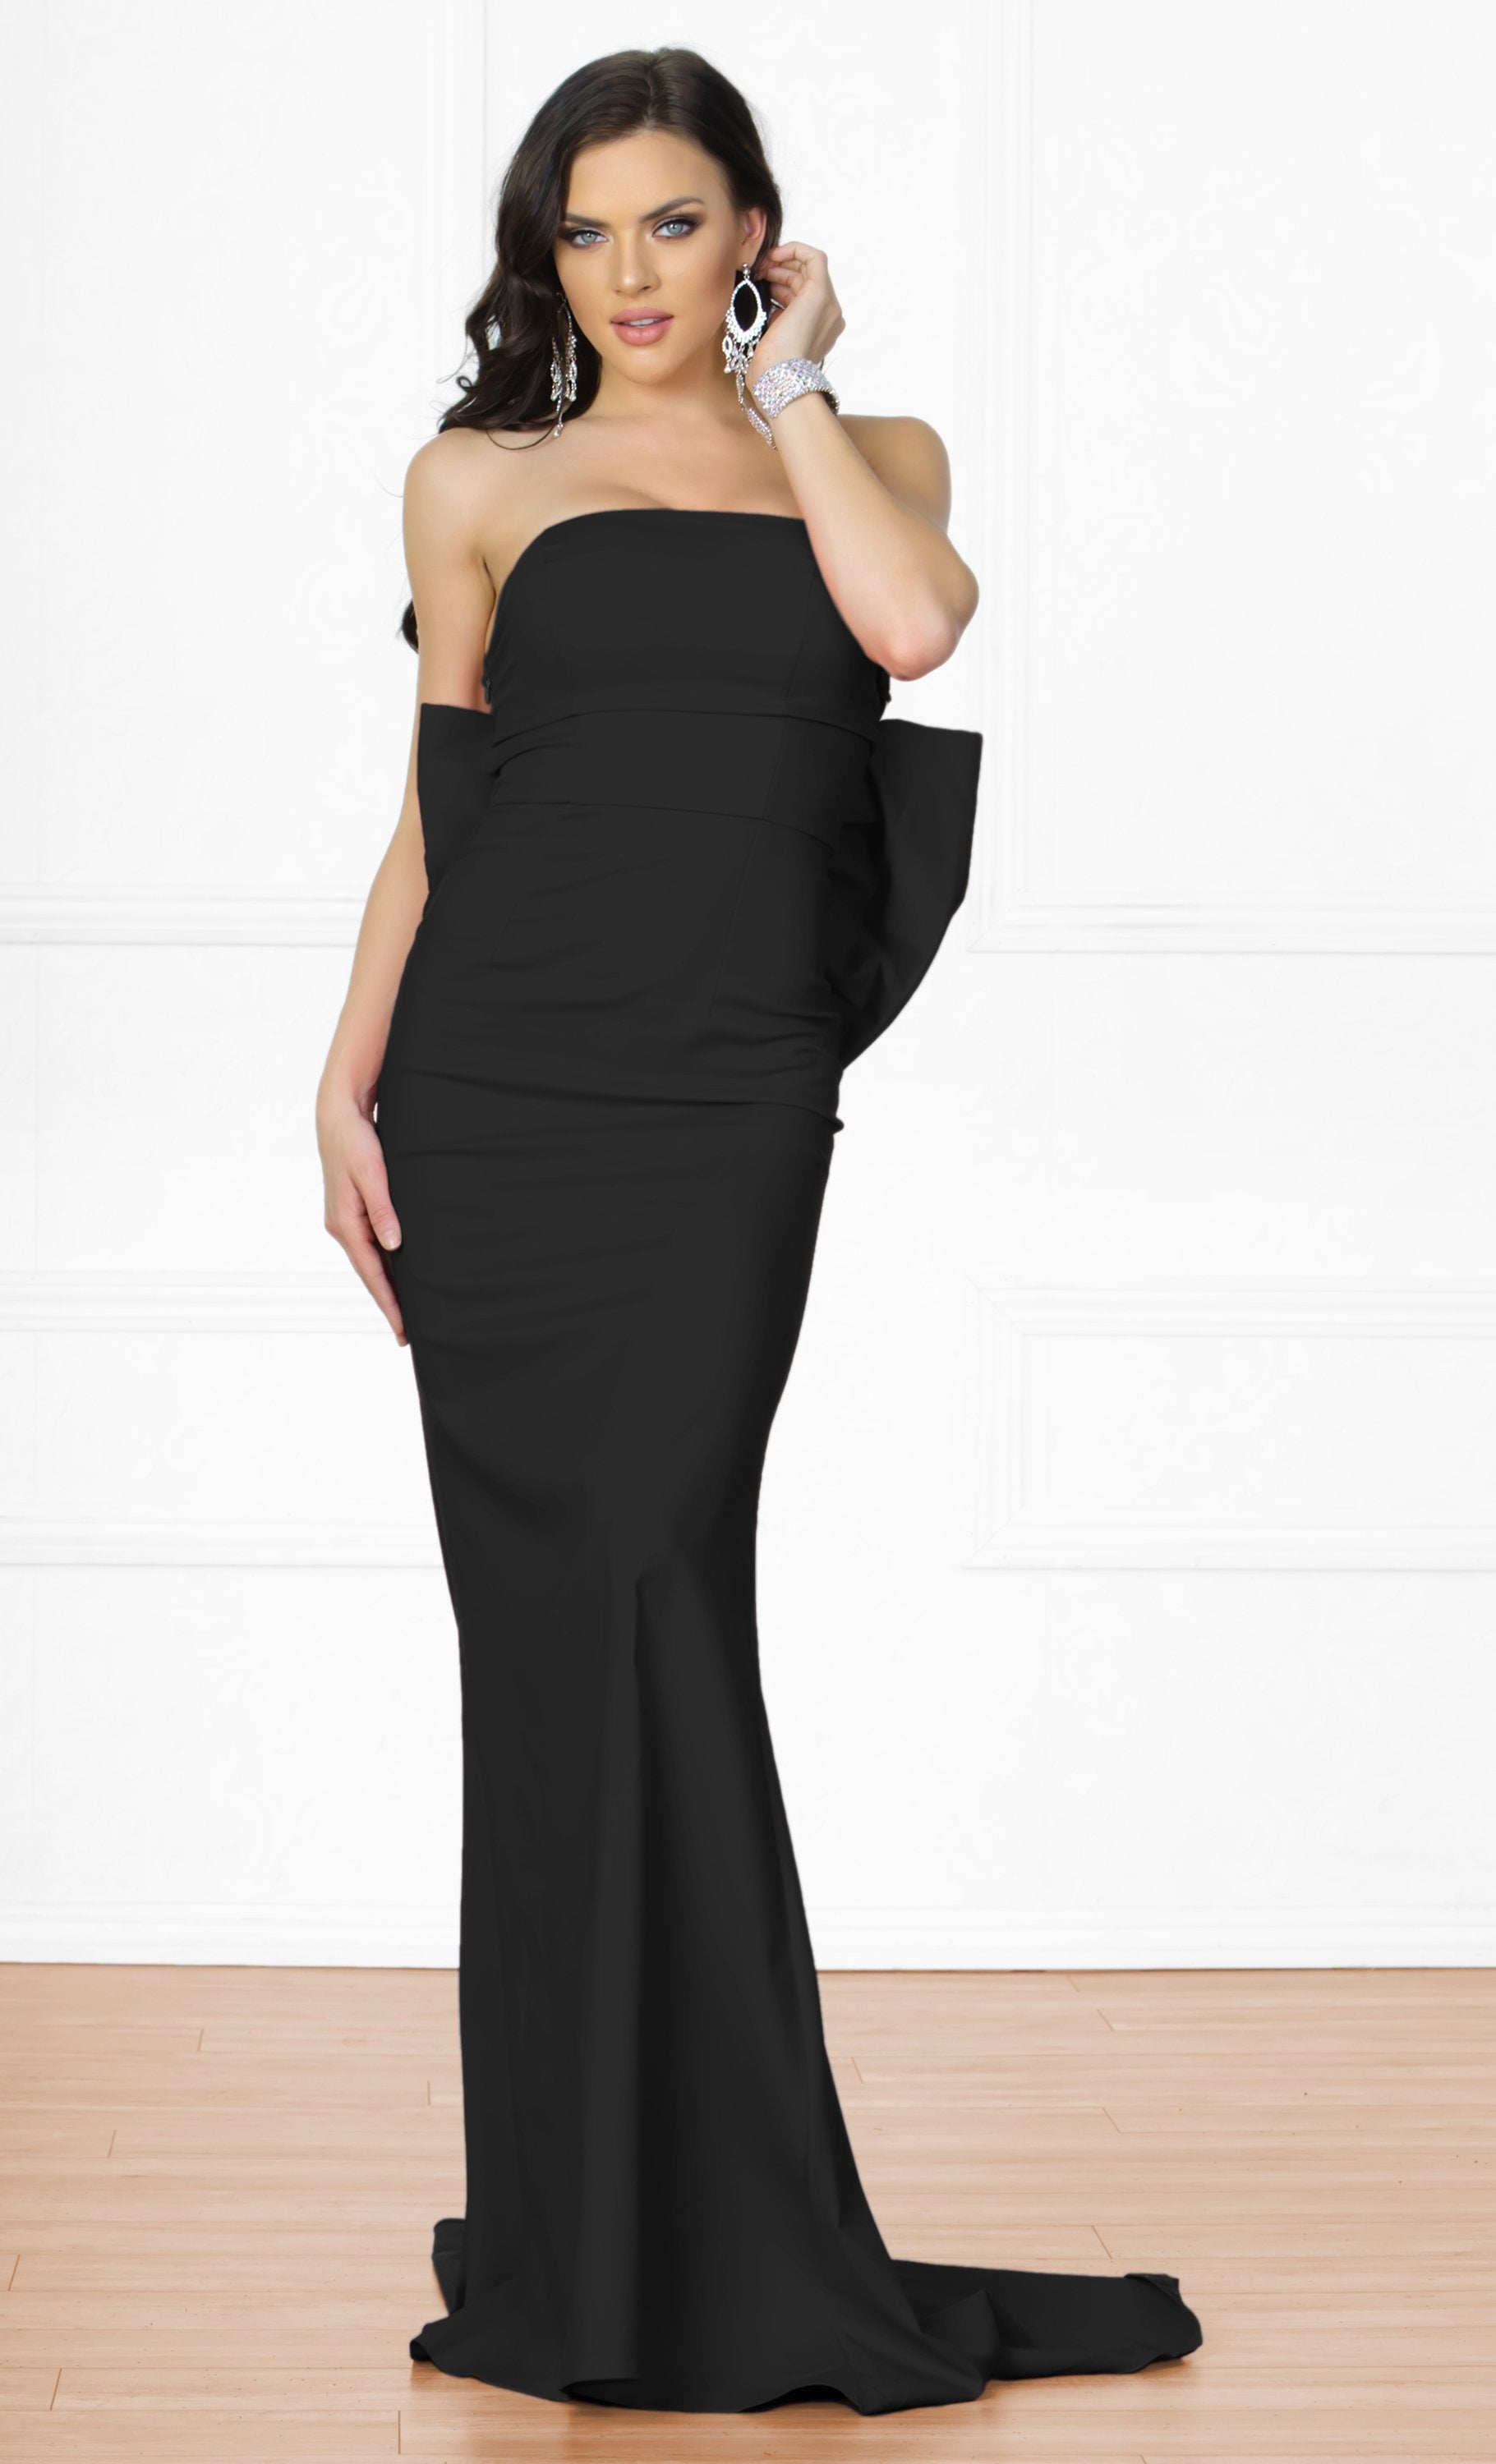 Indie XO Bow Me a Kiss Black Strapless Low Back Maxi Dress Gown